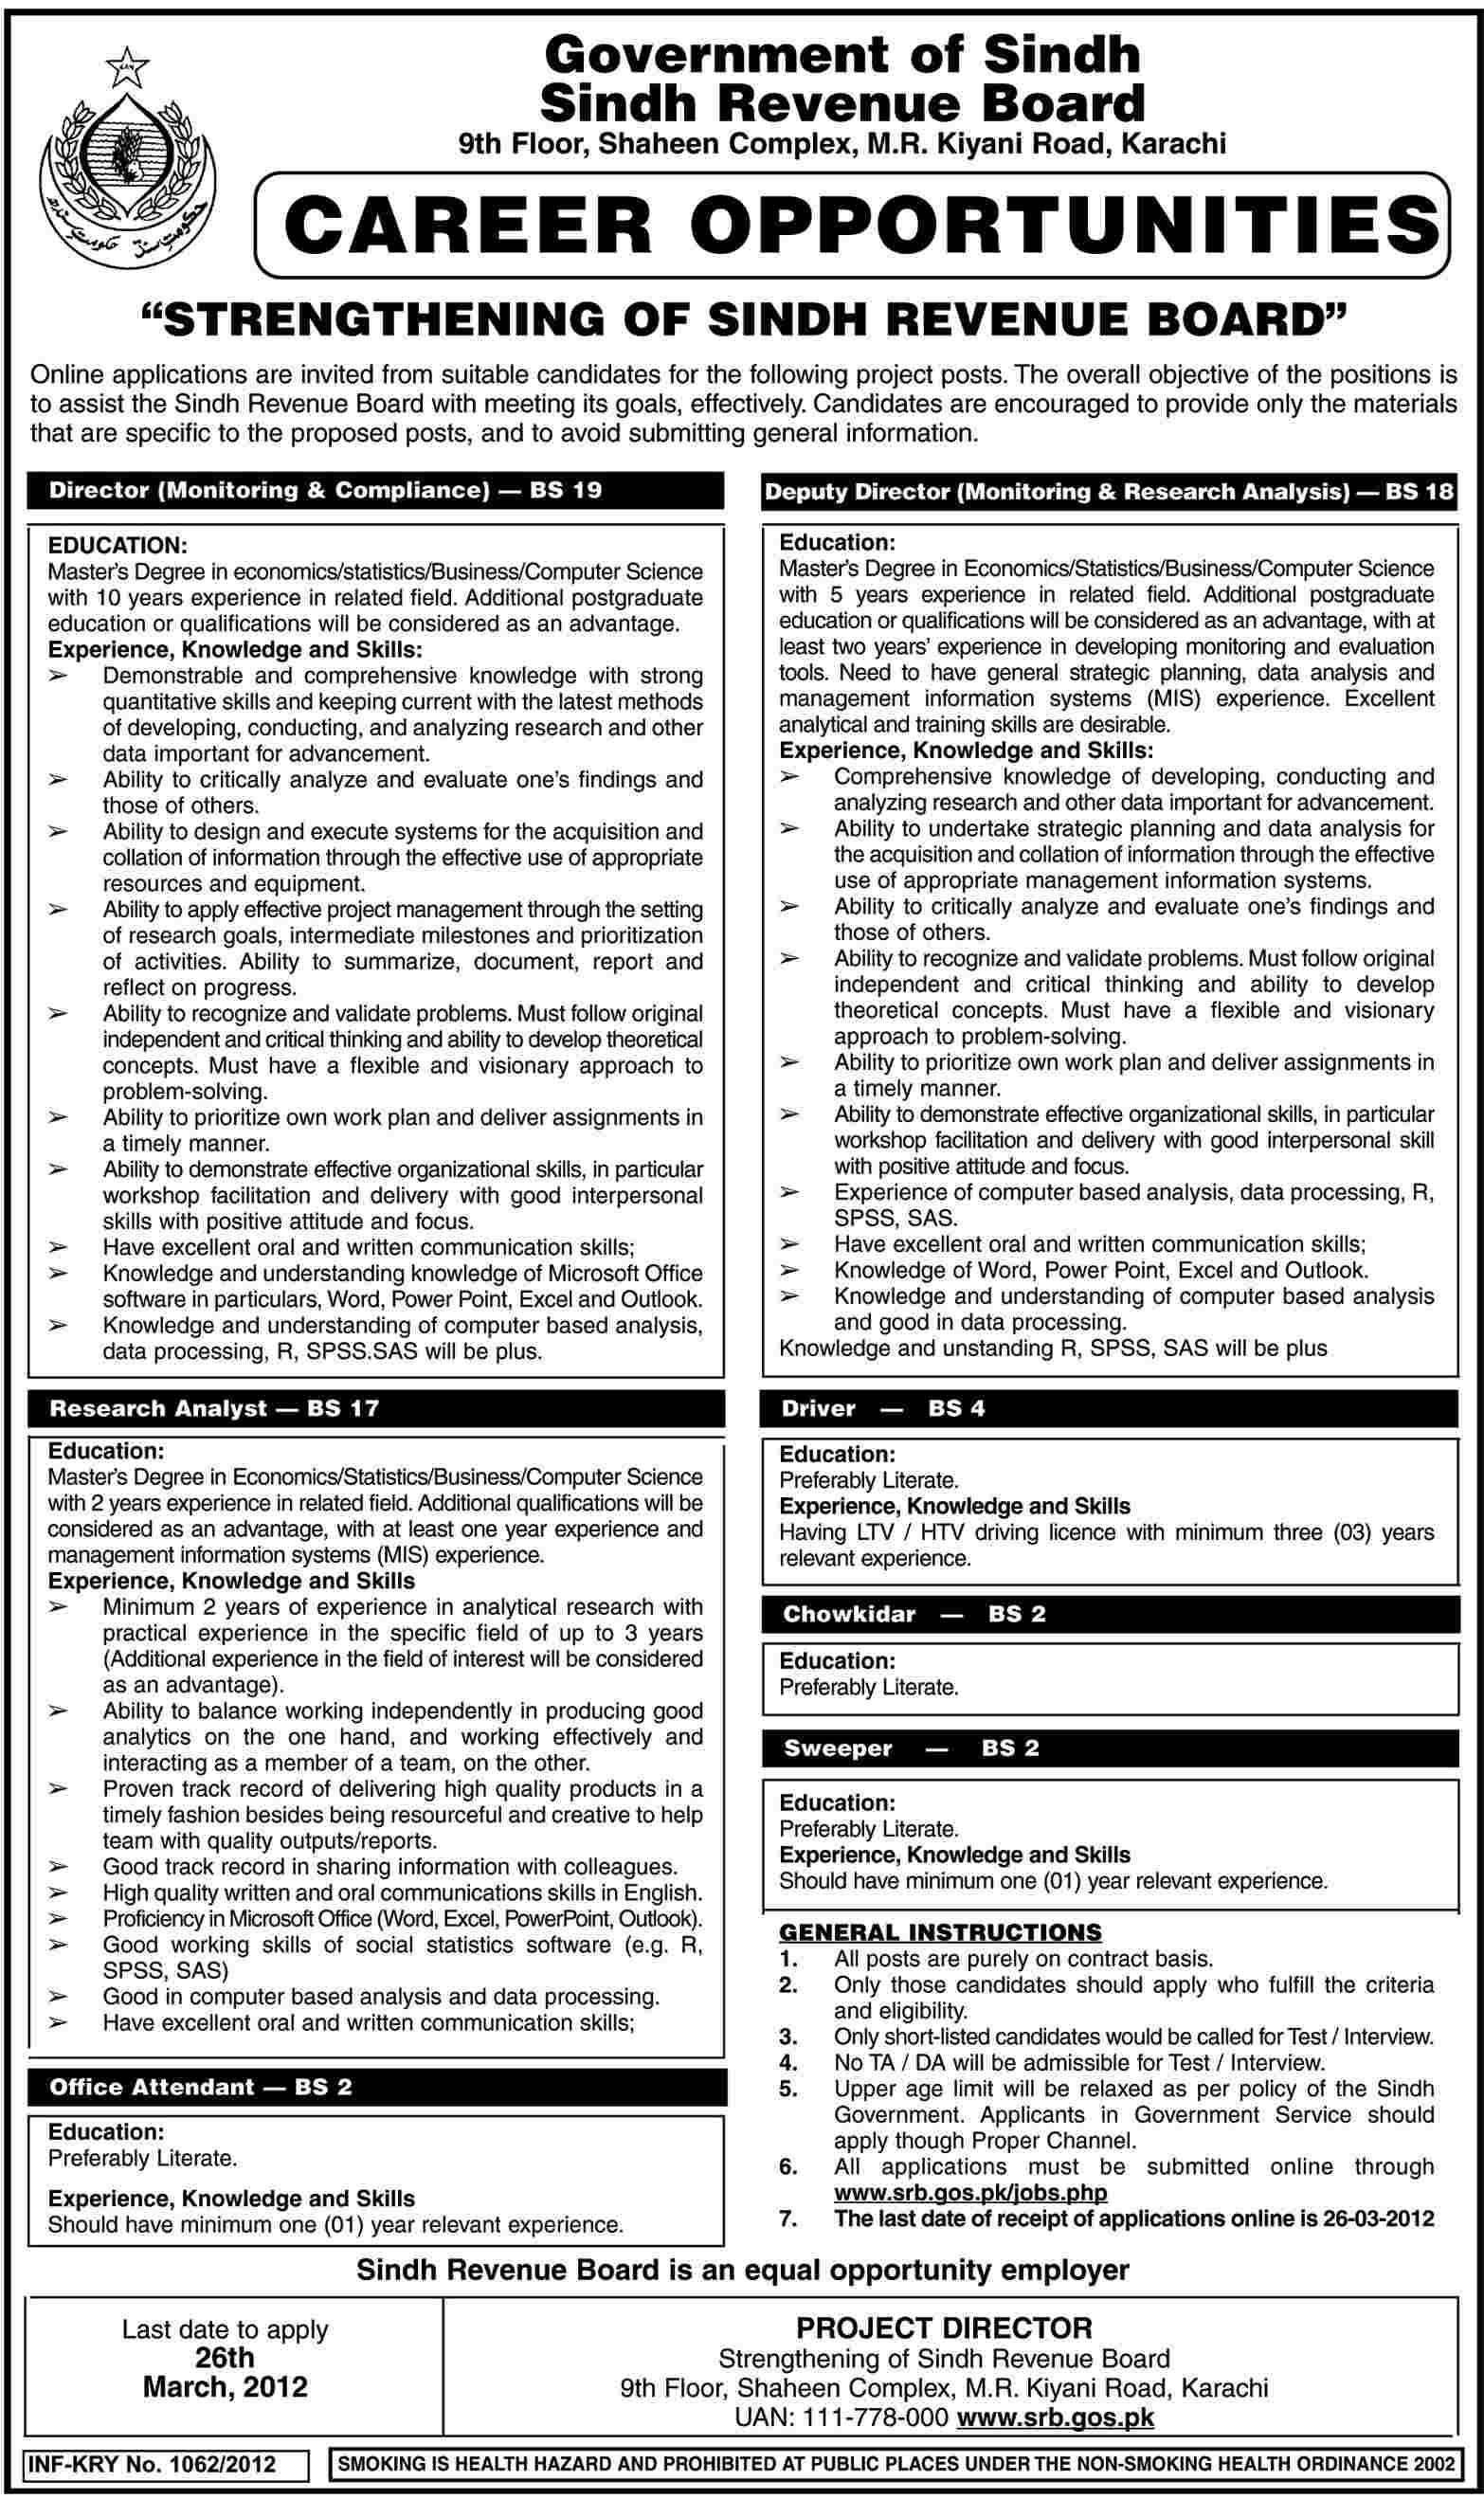 Sindh Revenue Board, Government of Sindh Jobs